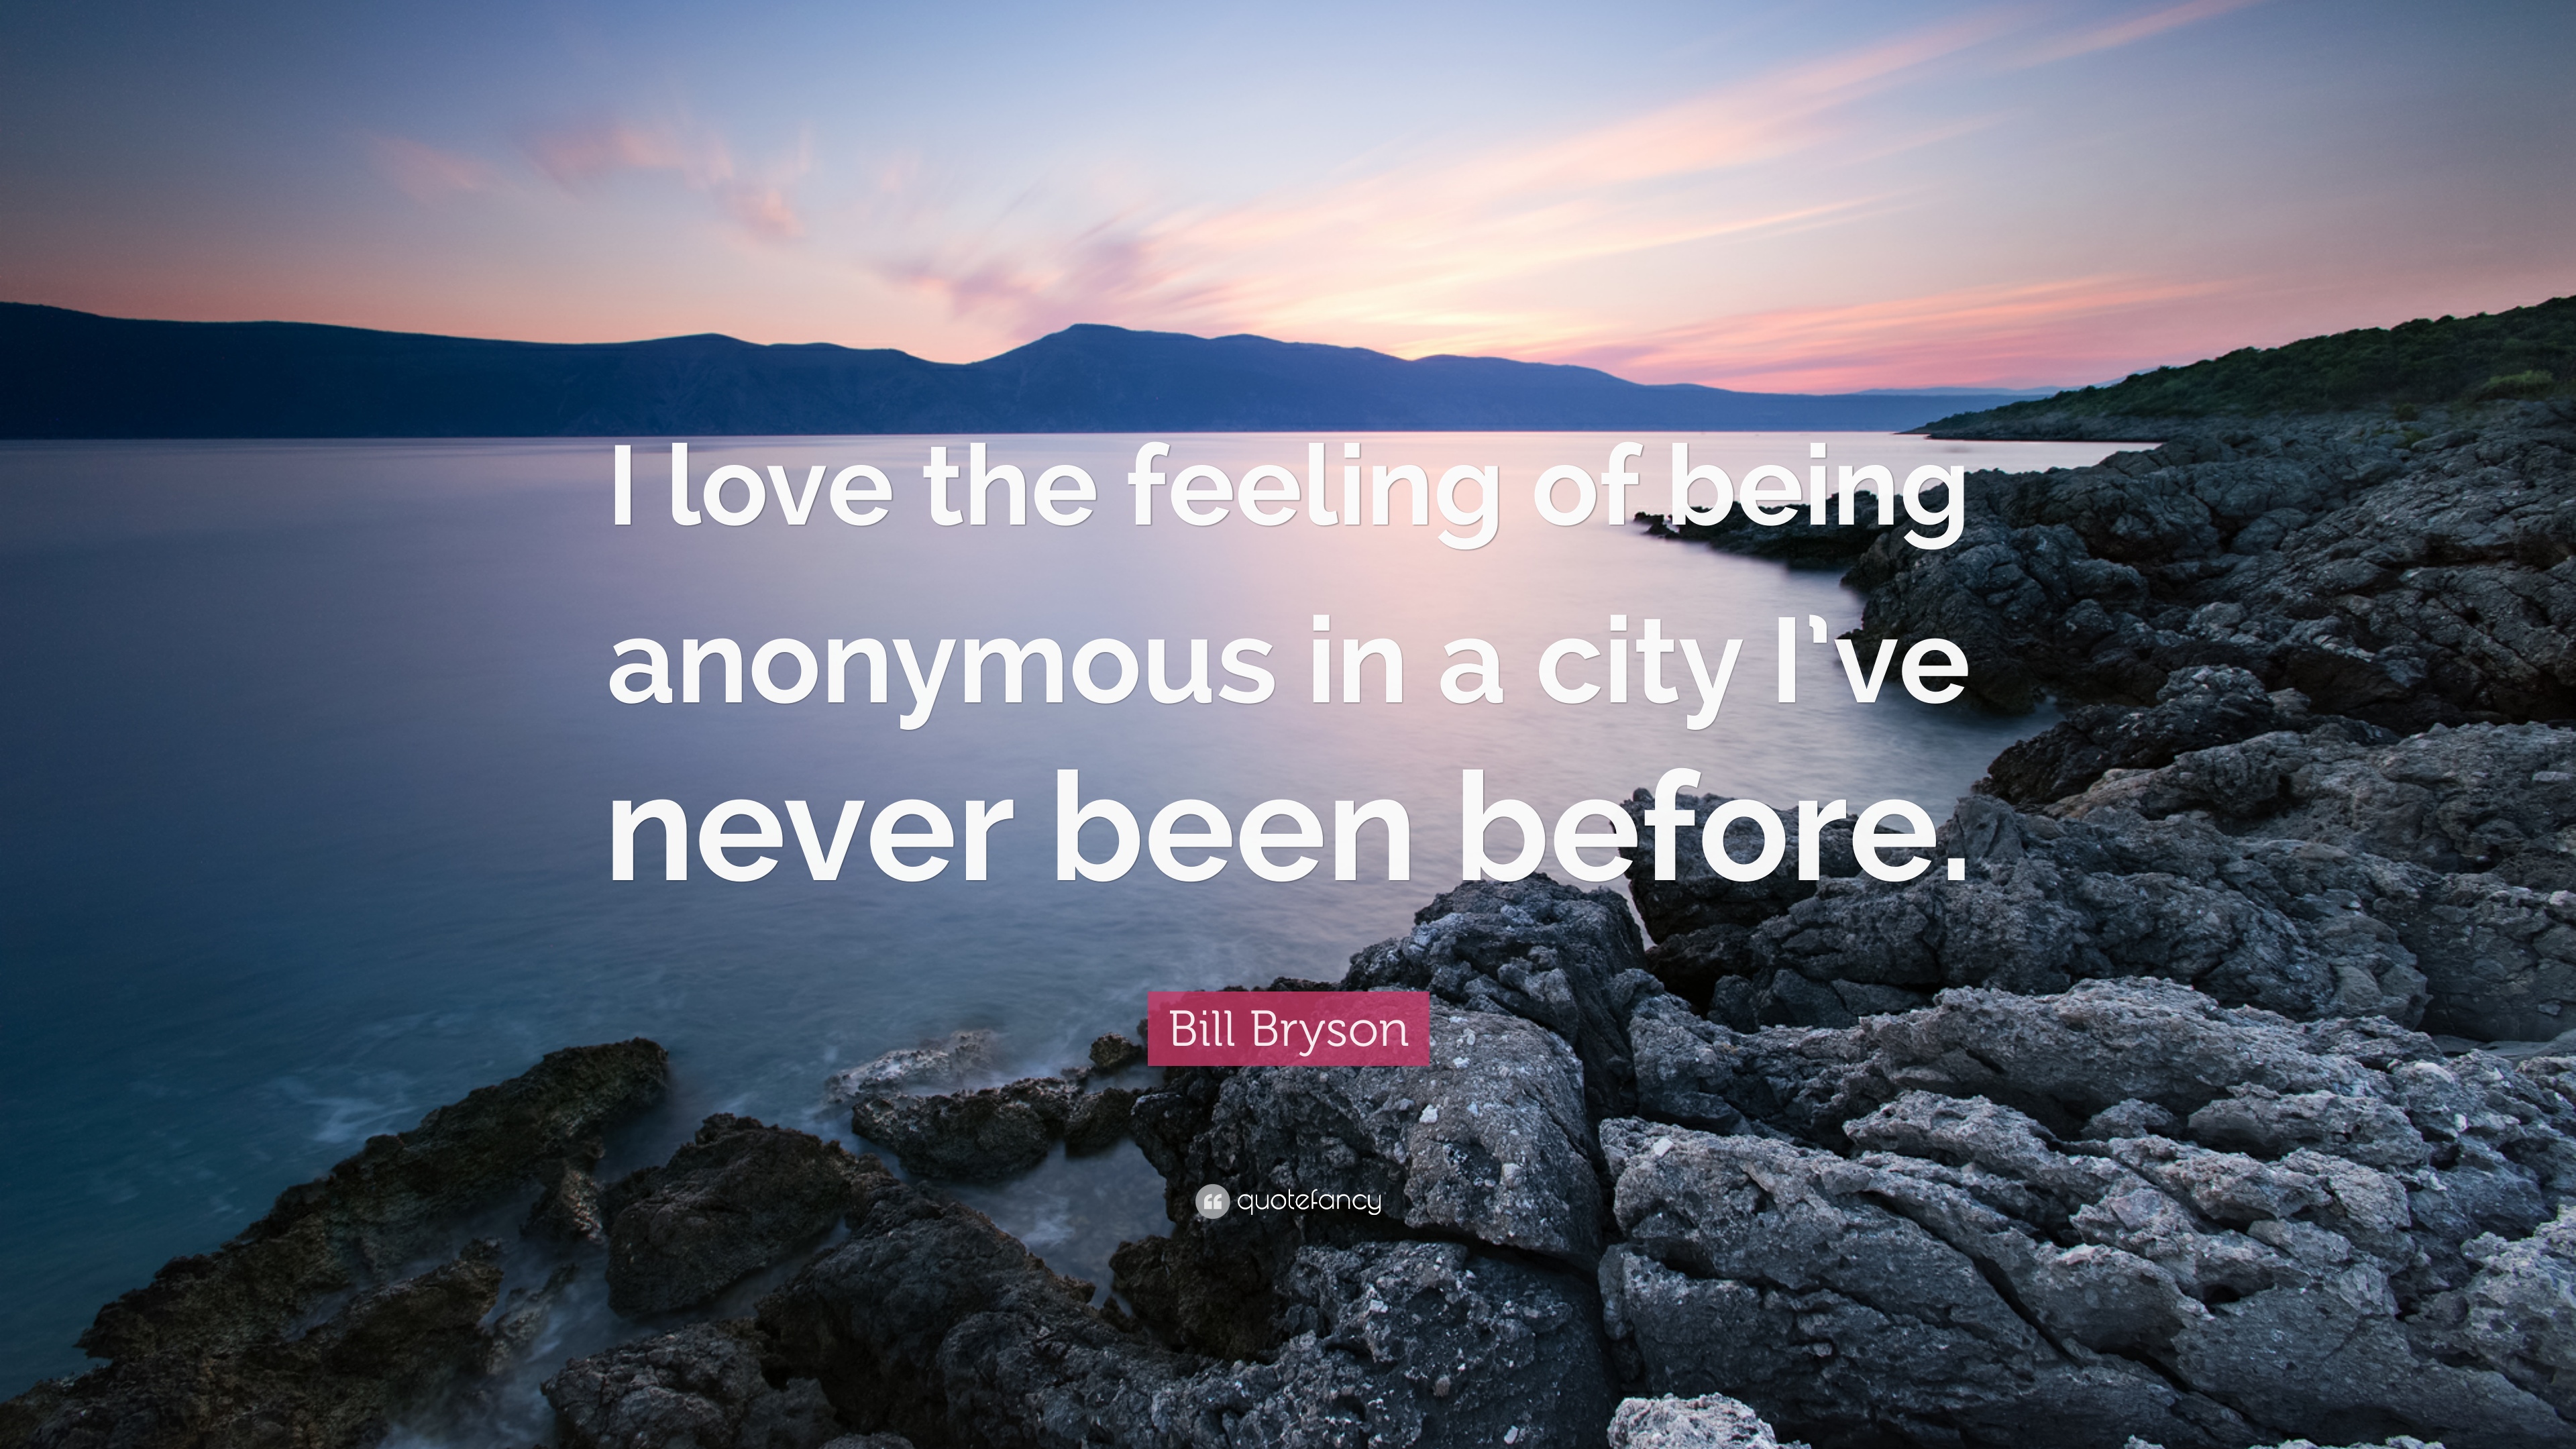 Bill Bryson Quote: “I love the feeling of being anonymous